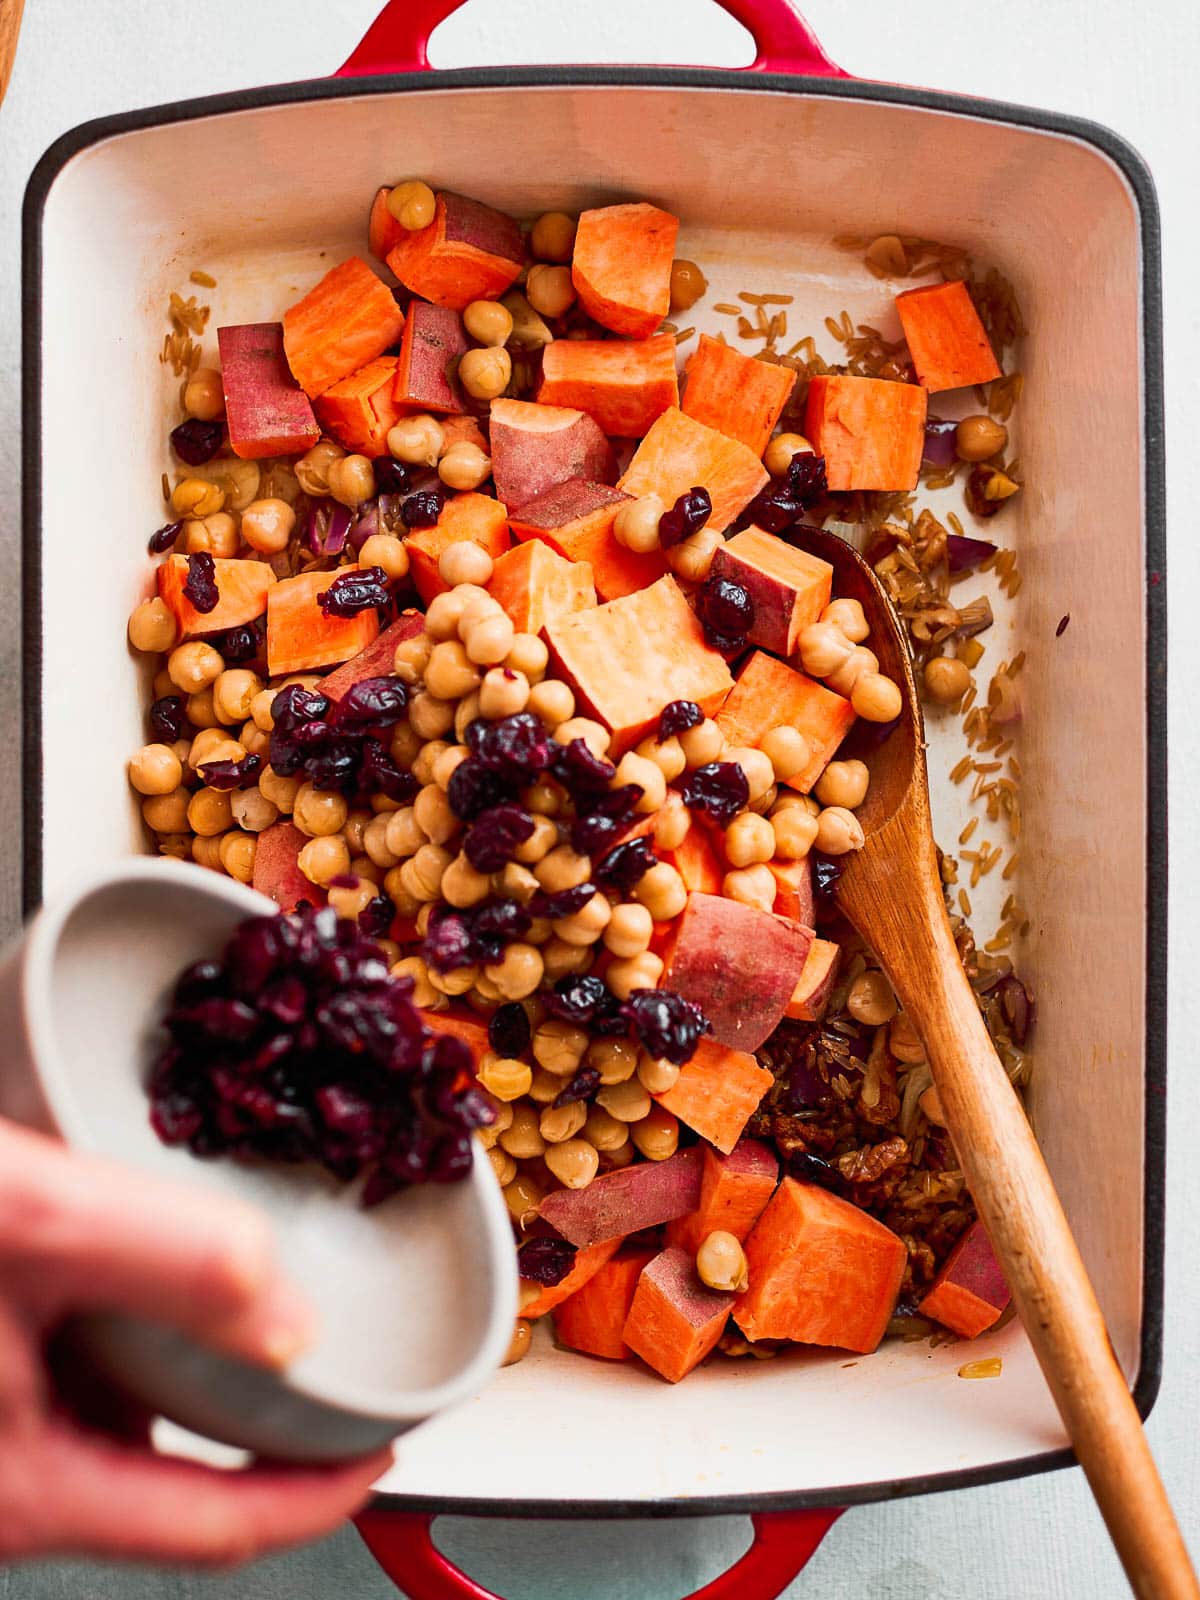 Adding the sweet potatoes, chickpeas and dried cranberries to the pan